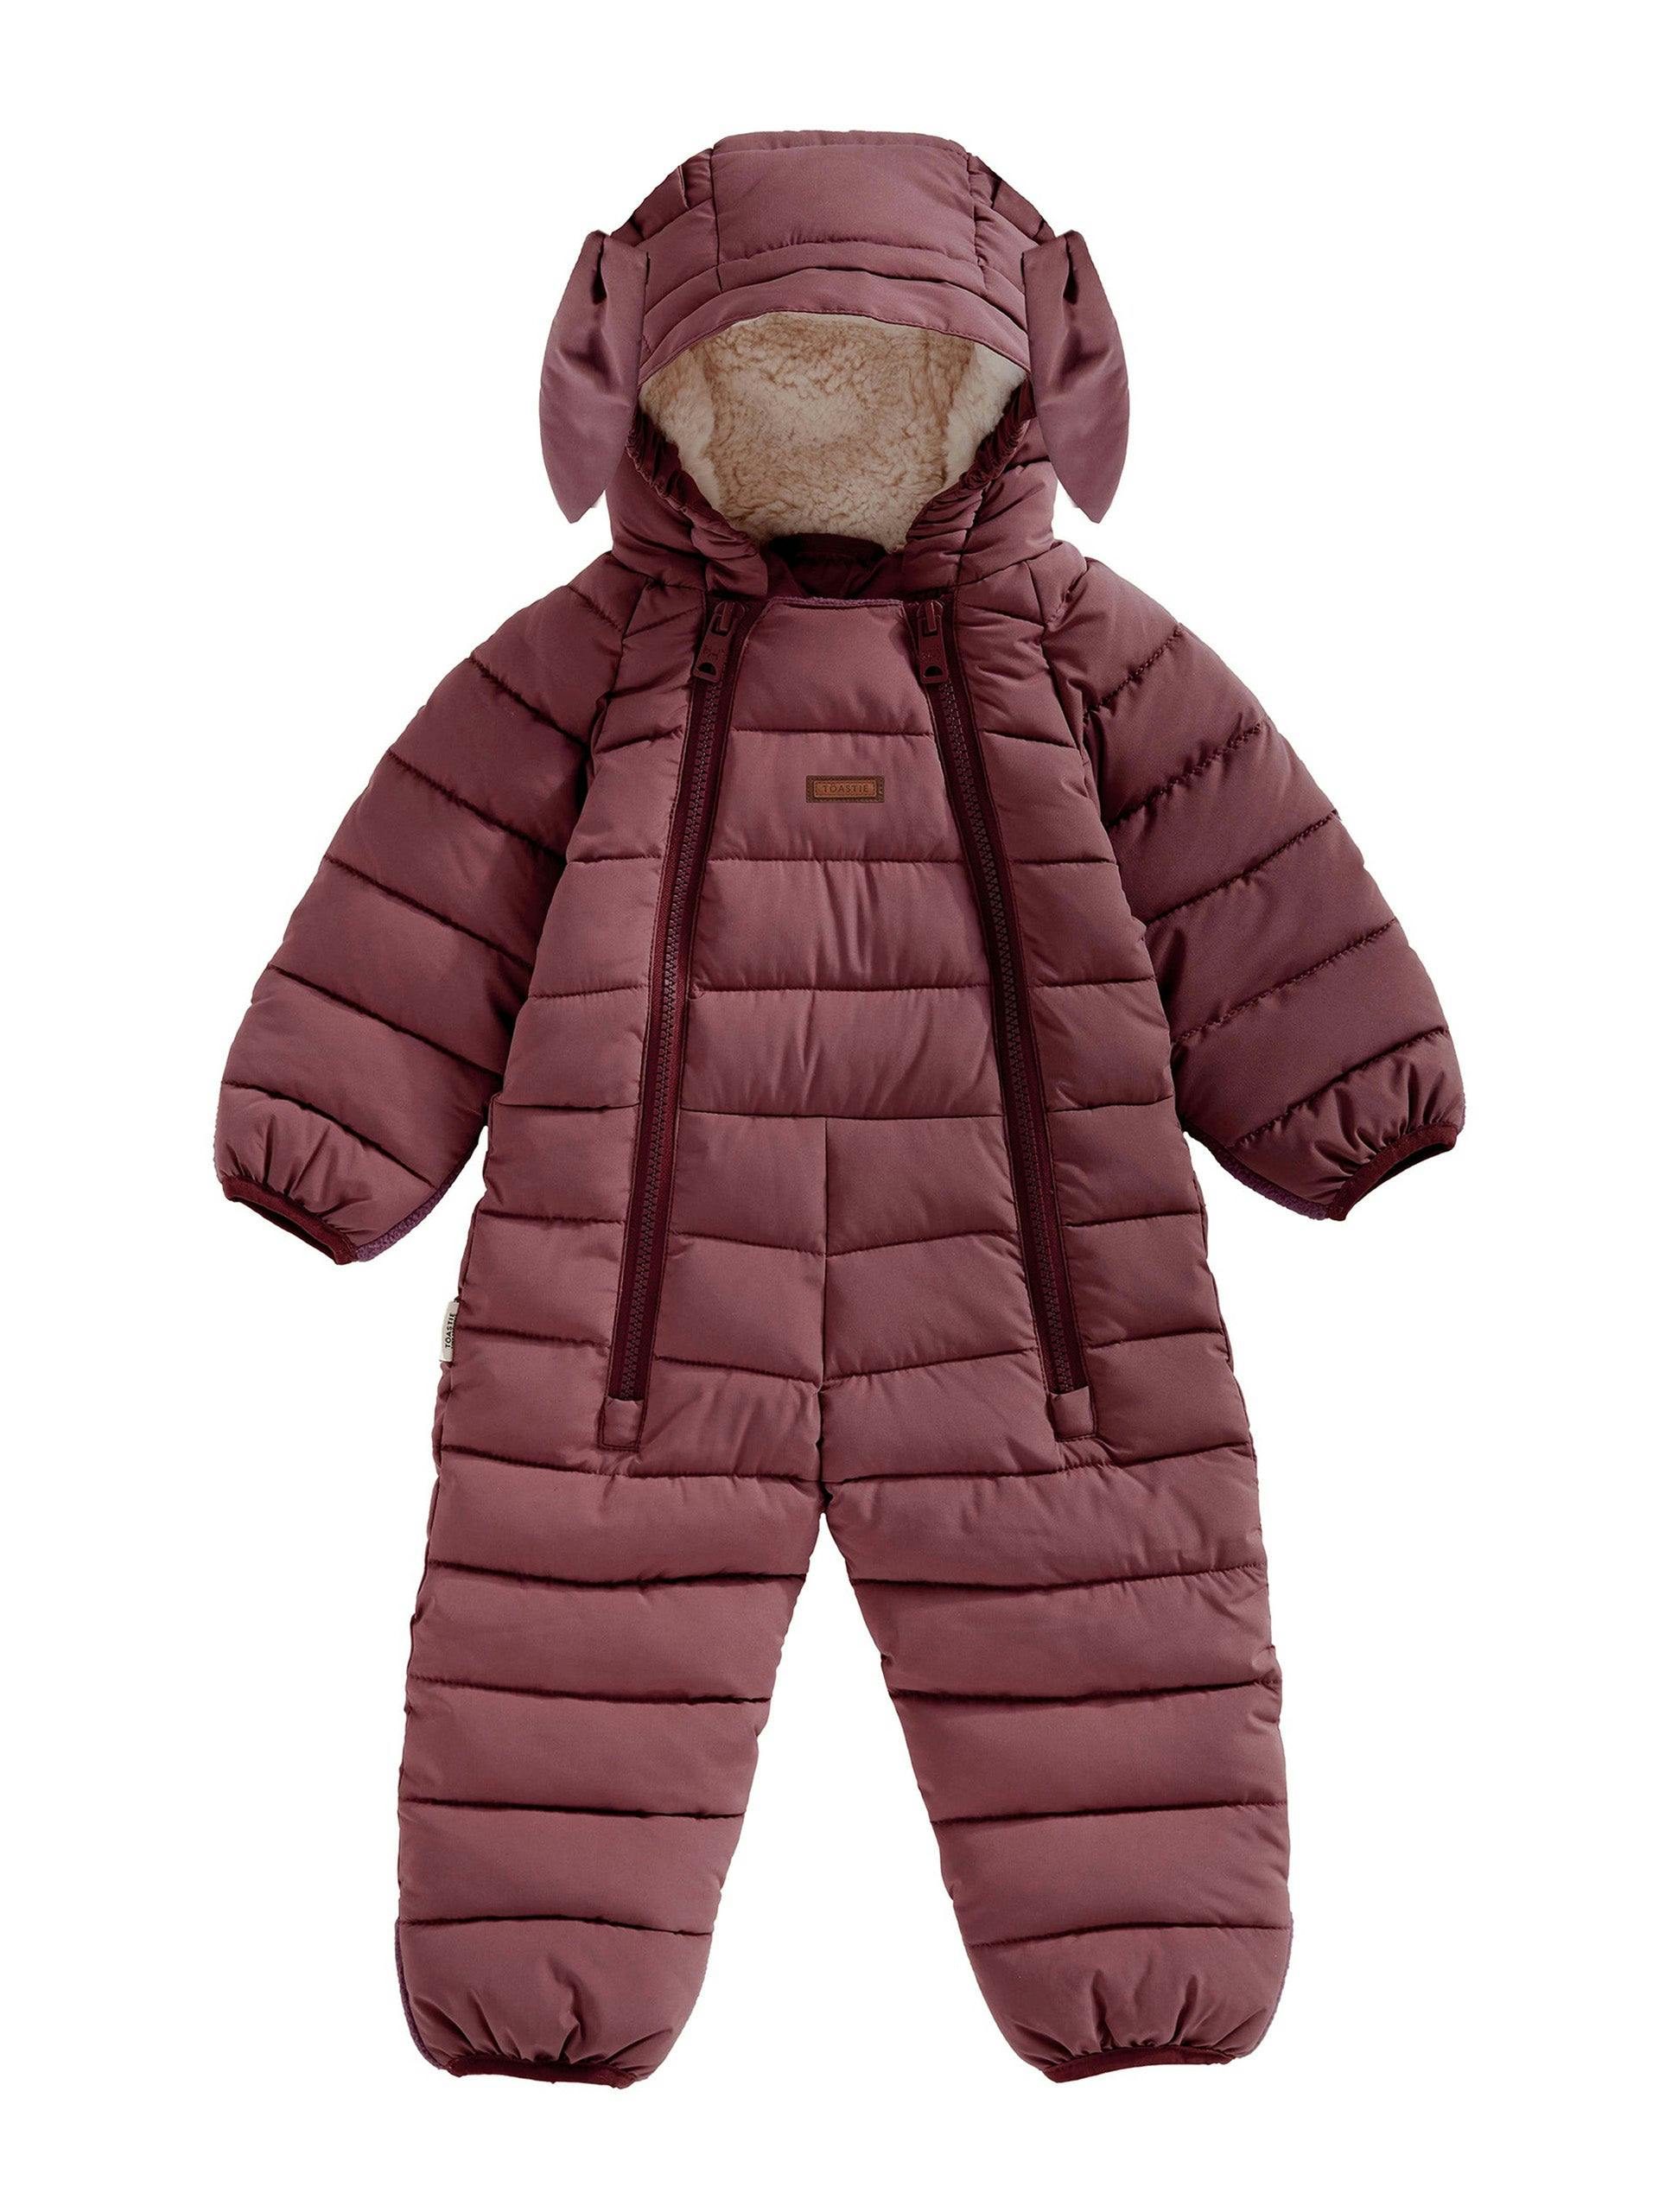 Berry quilted onesie